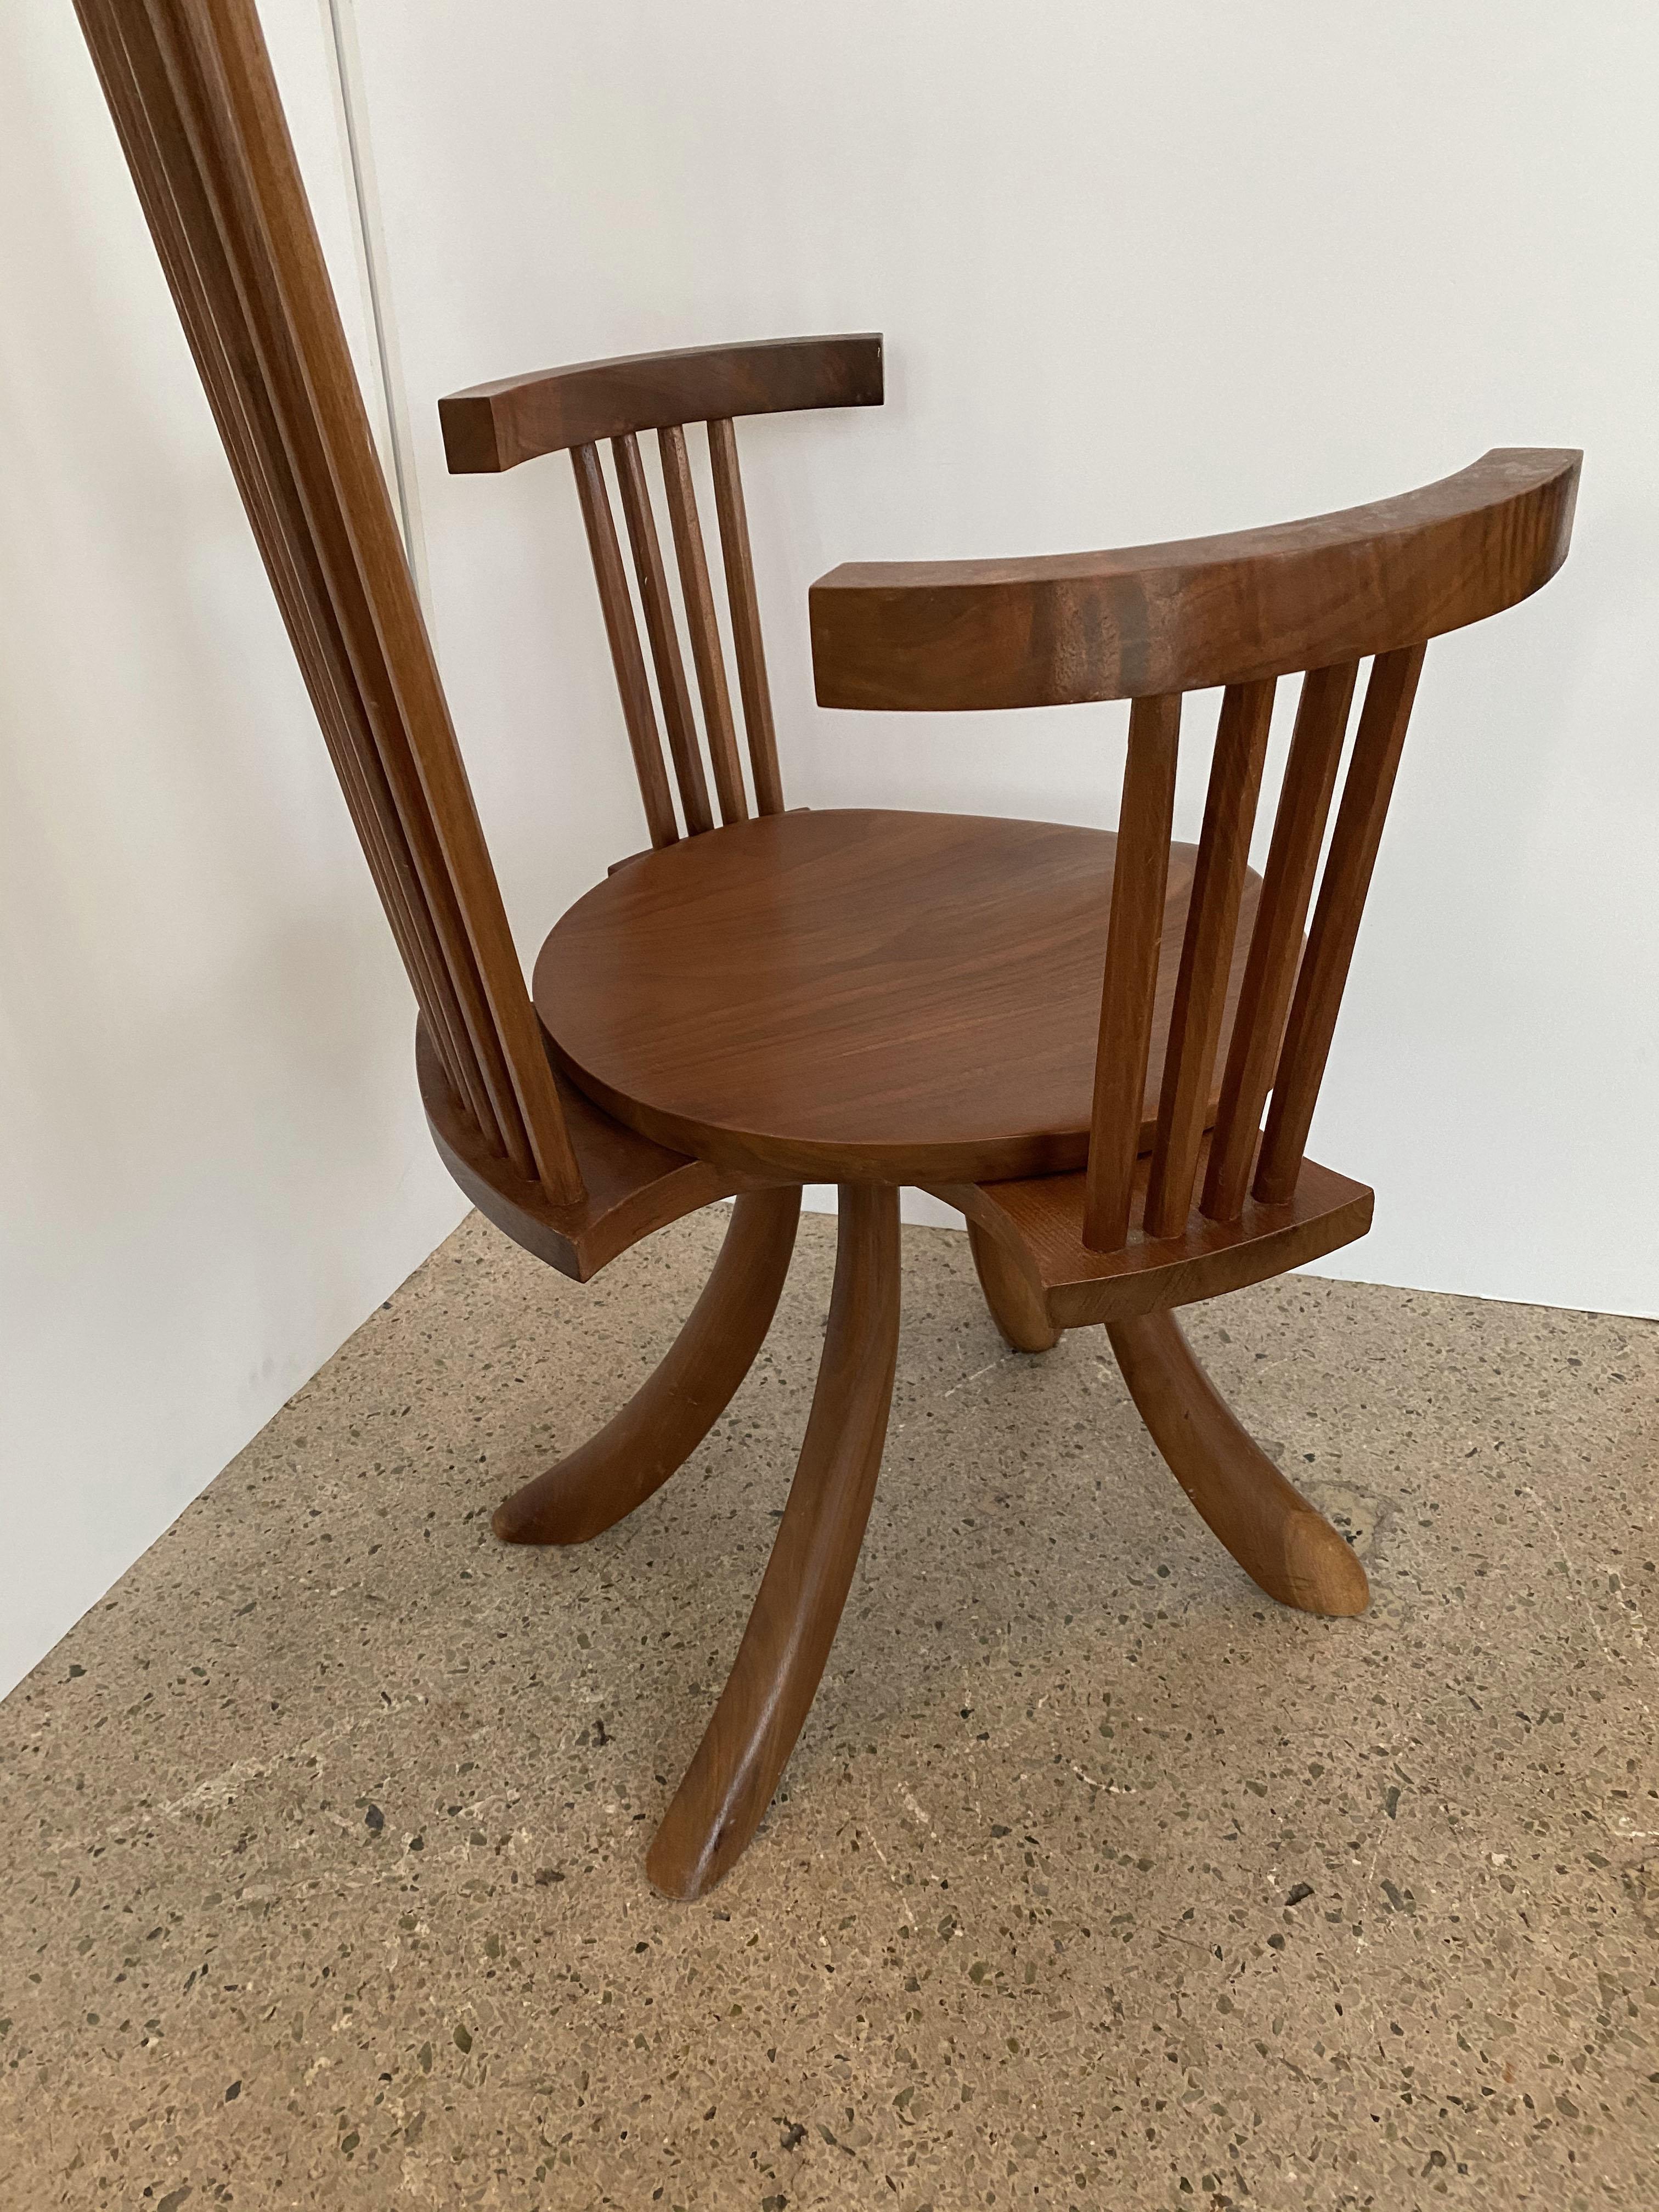 Jeffrey Greene is a New Hope, PA furniture maker who has been influenced by the other great cabinet makers from New Hope, such as George Nakashima and Philip Lloyd Powell.